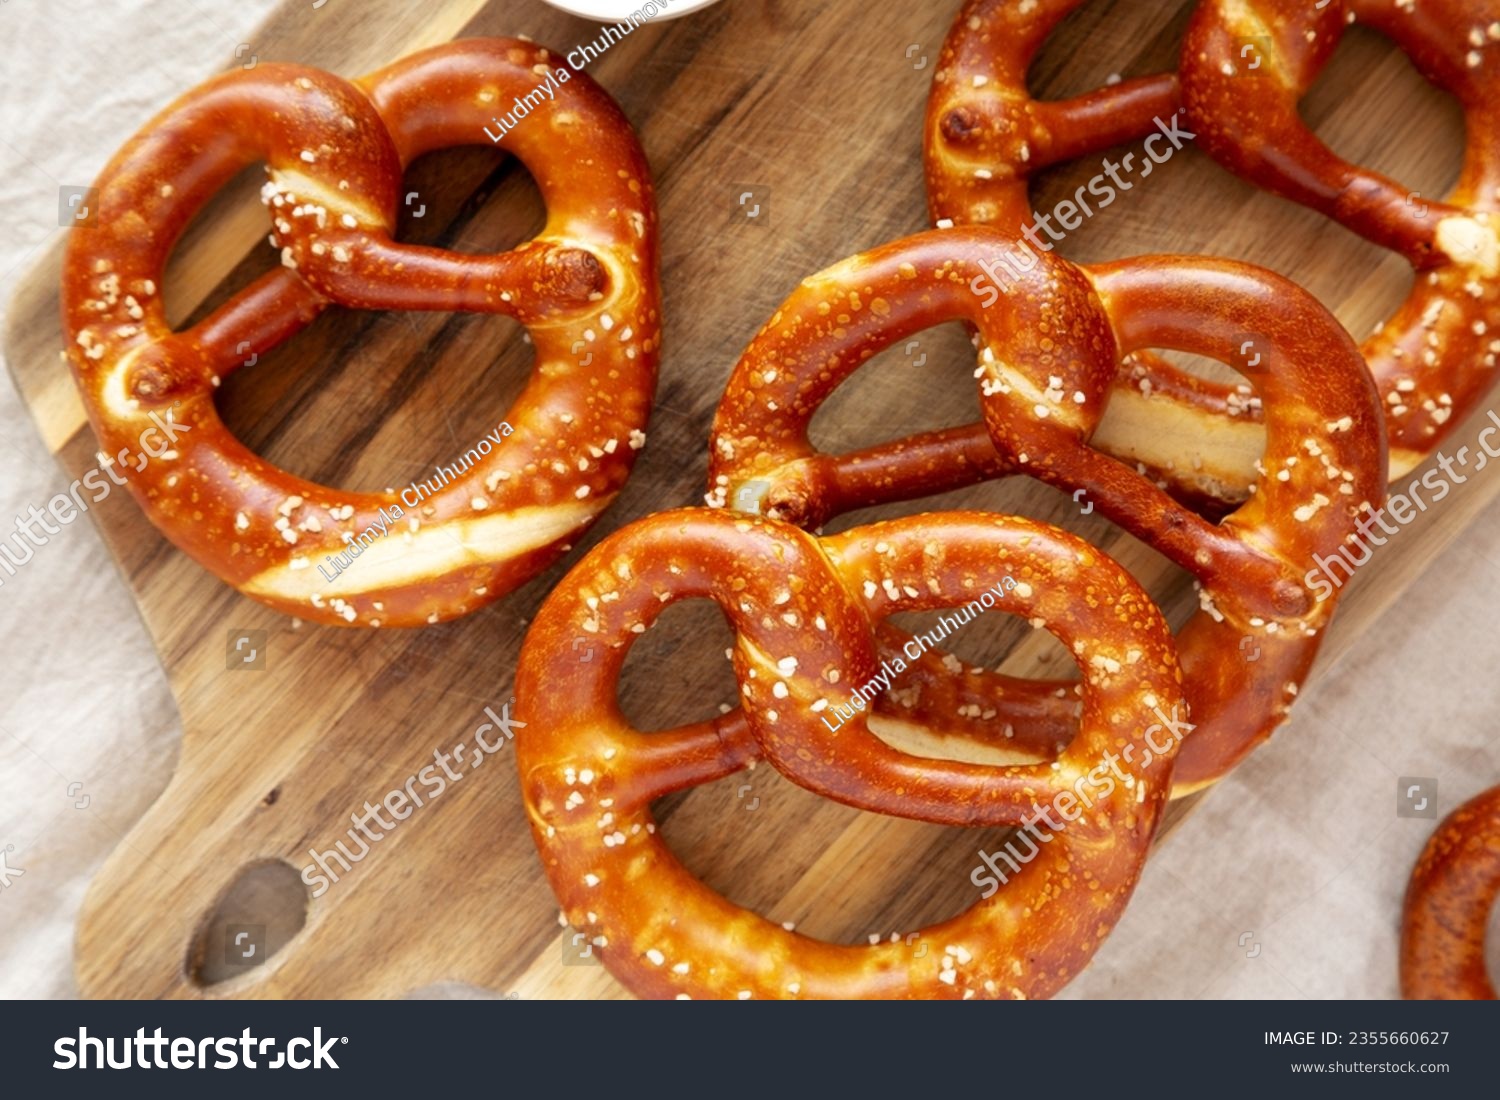 Homemade Soft Bavarian Pretzels with Mustard on a wooden board, top view. #2355660627